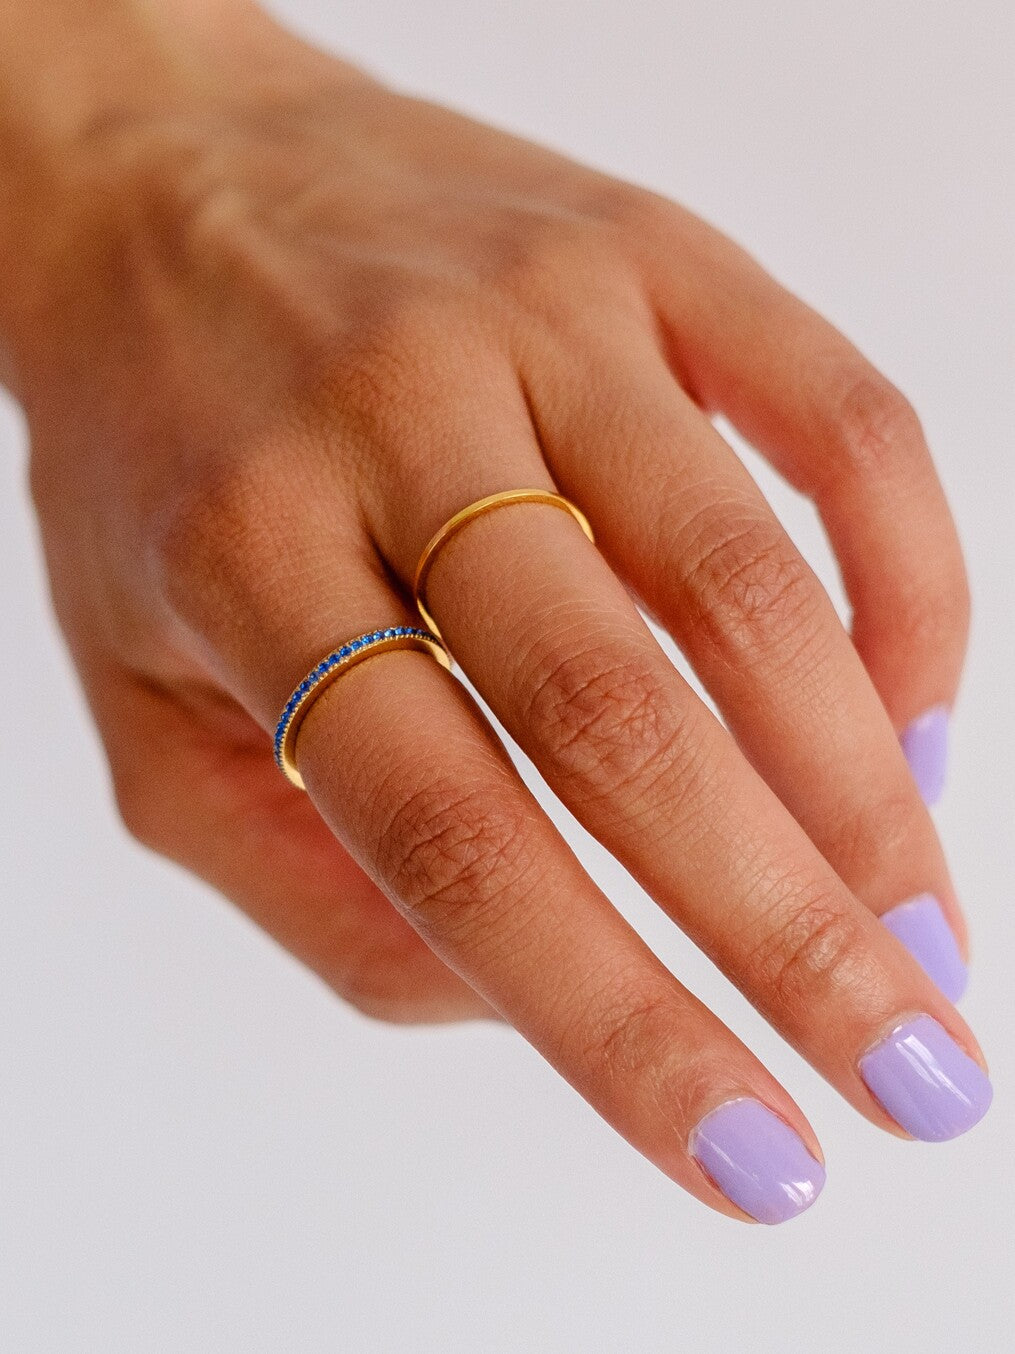 Woman's hand with purple nail polish wearing two gold rings. One ring is an eternity band set all the way around. The other is a slim gold stacking ring 